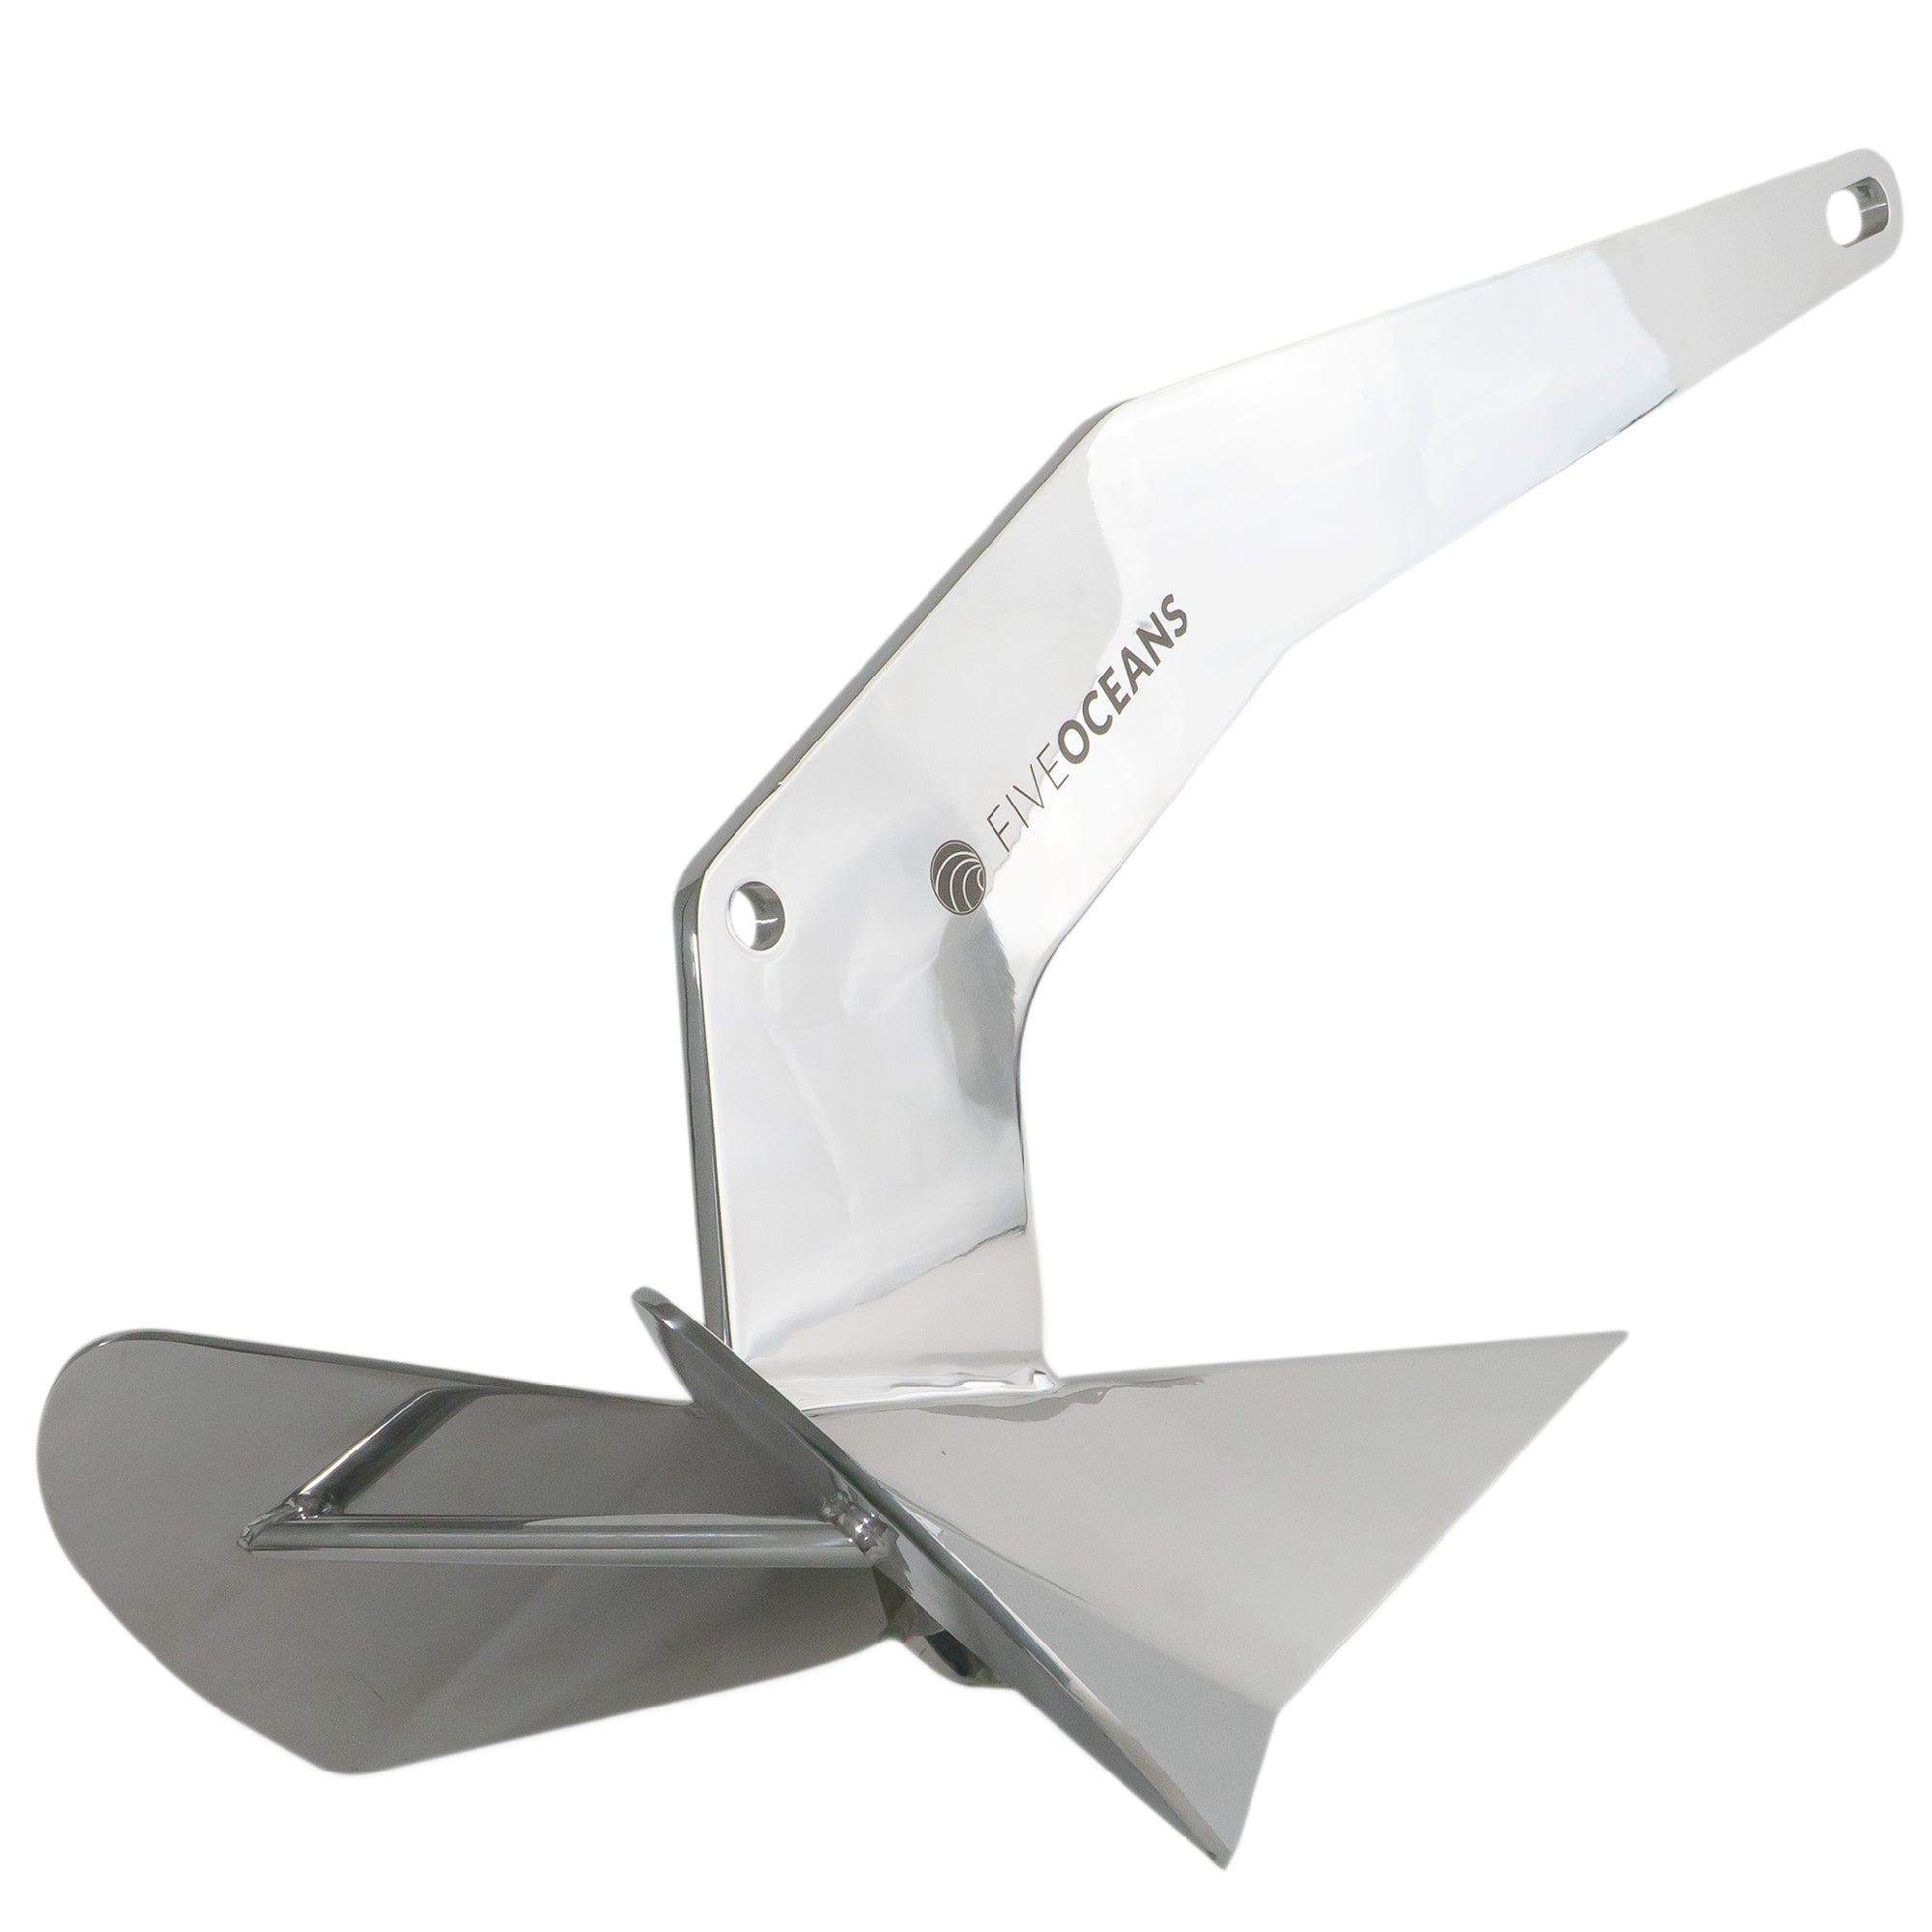 Delta Style Wing Anchor, 33 Lb, Stainless Steel - FO4218